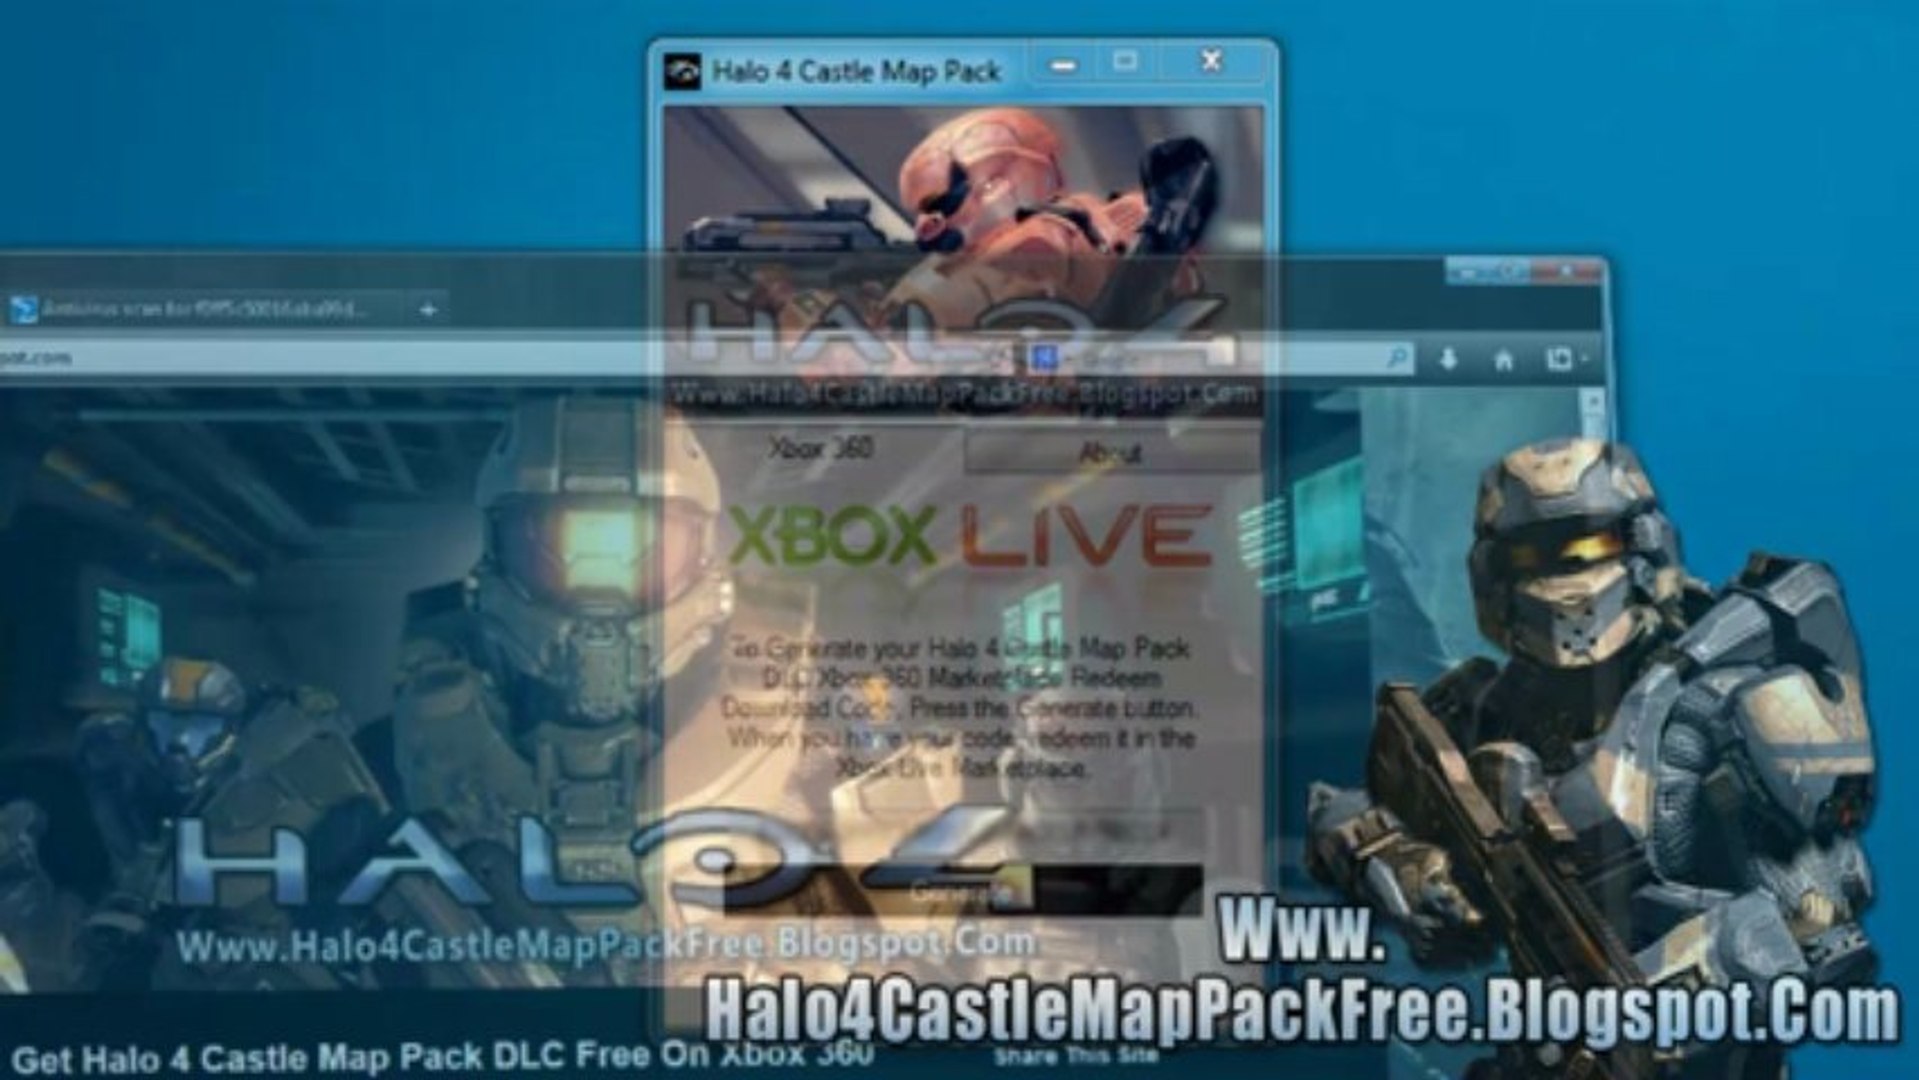 Halo 4 Castle Map Pack DLC Free Download - video Dailymotion